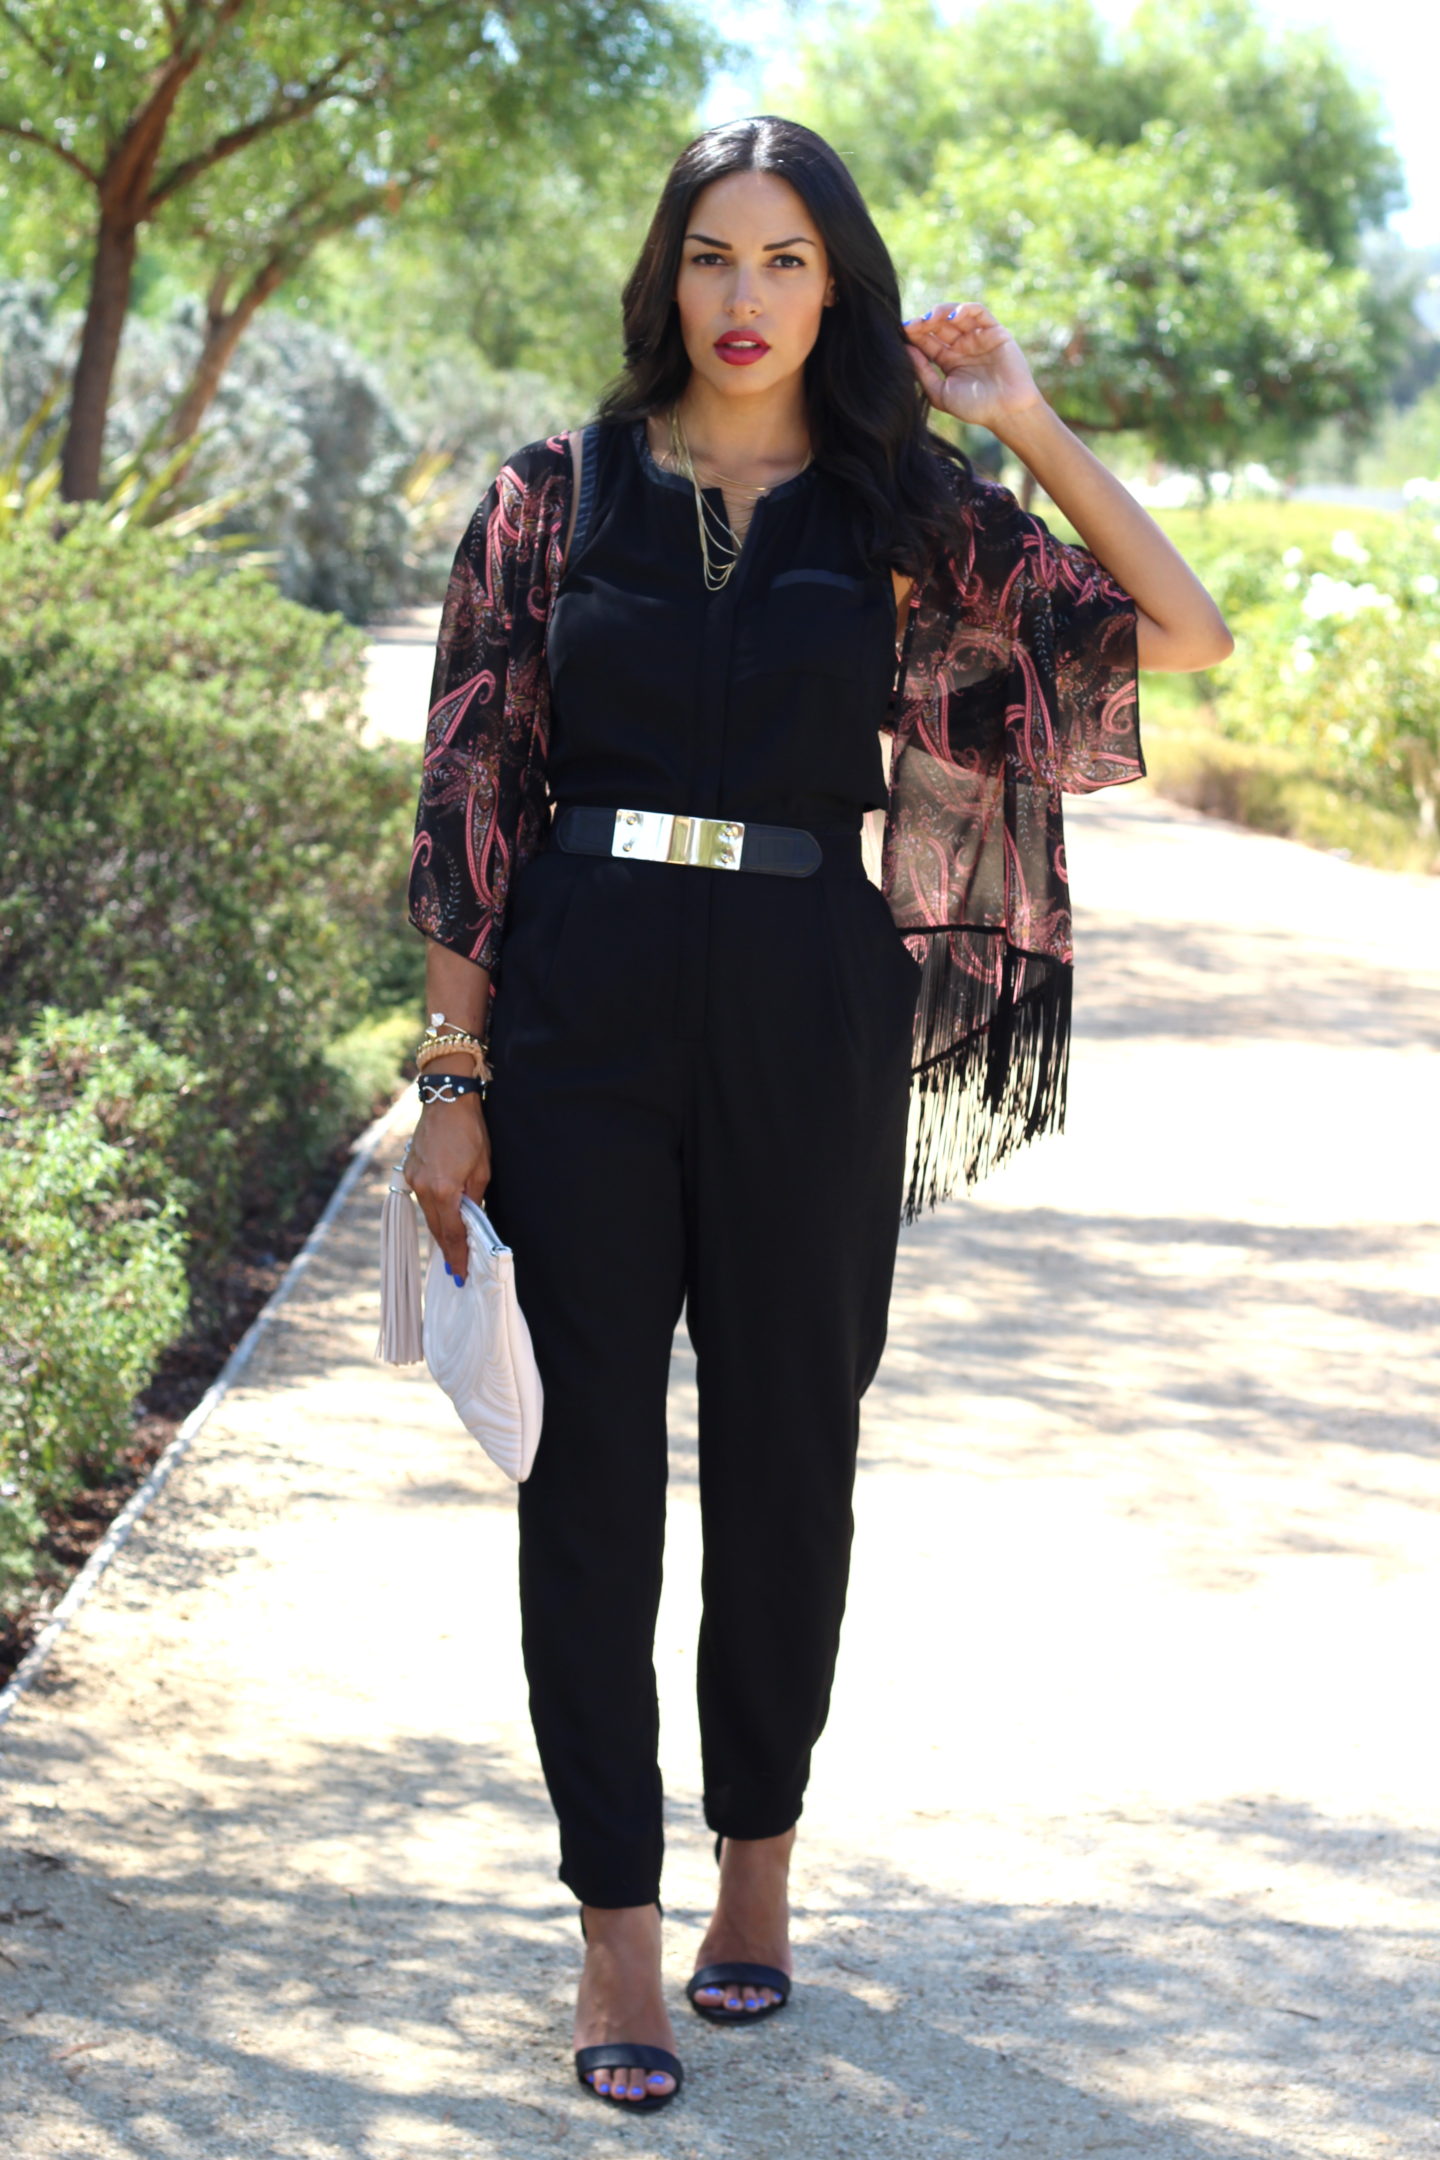 Paisley Love | The Dressy Chick